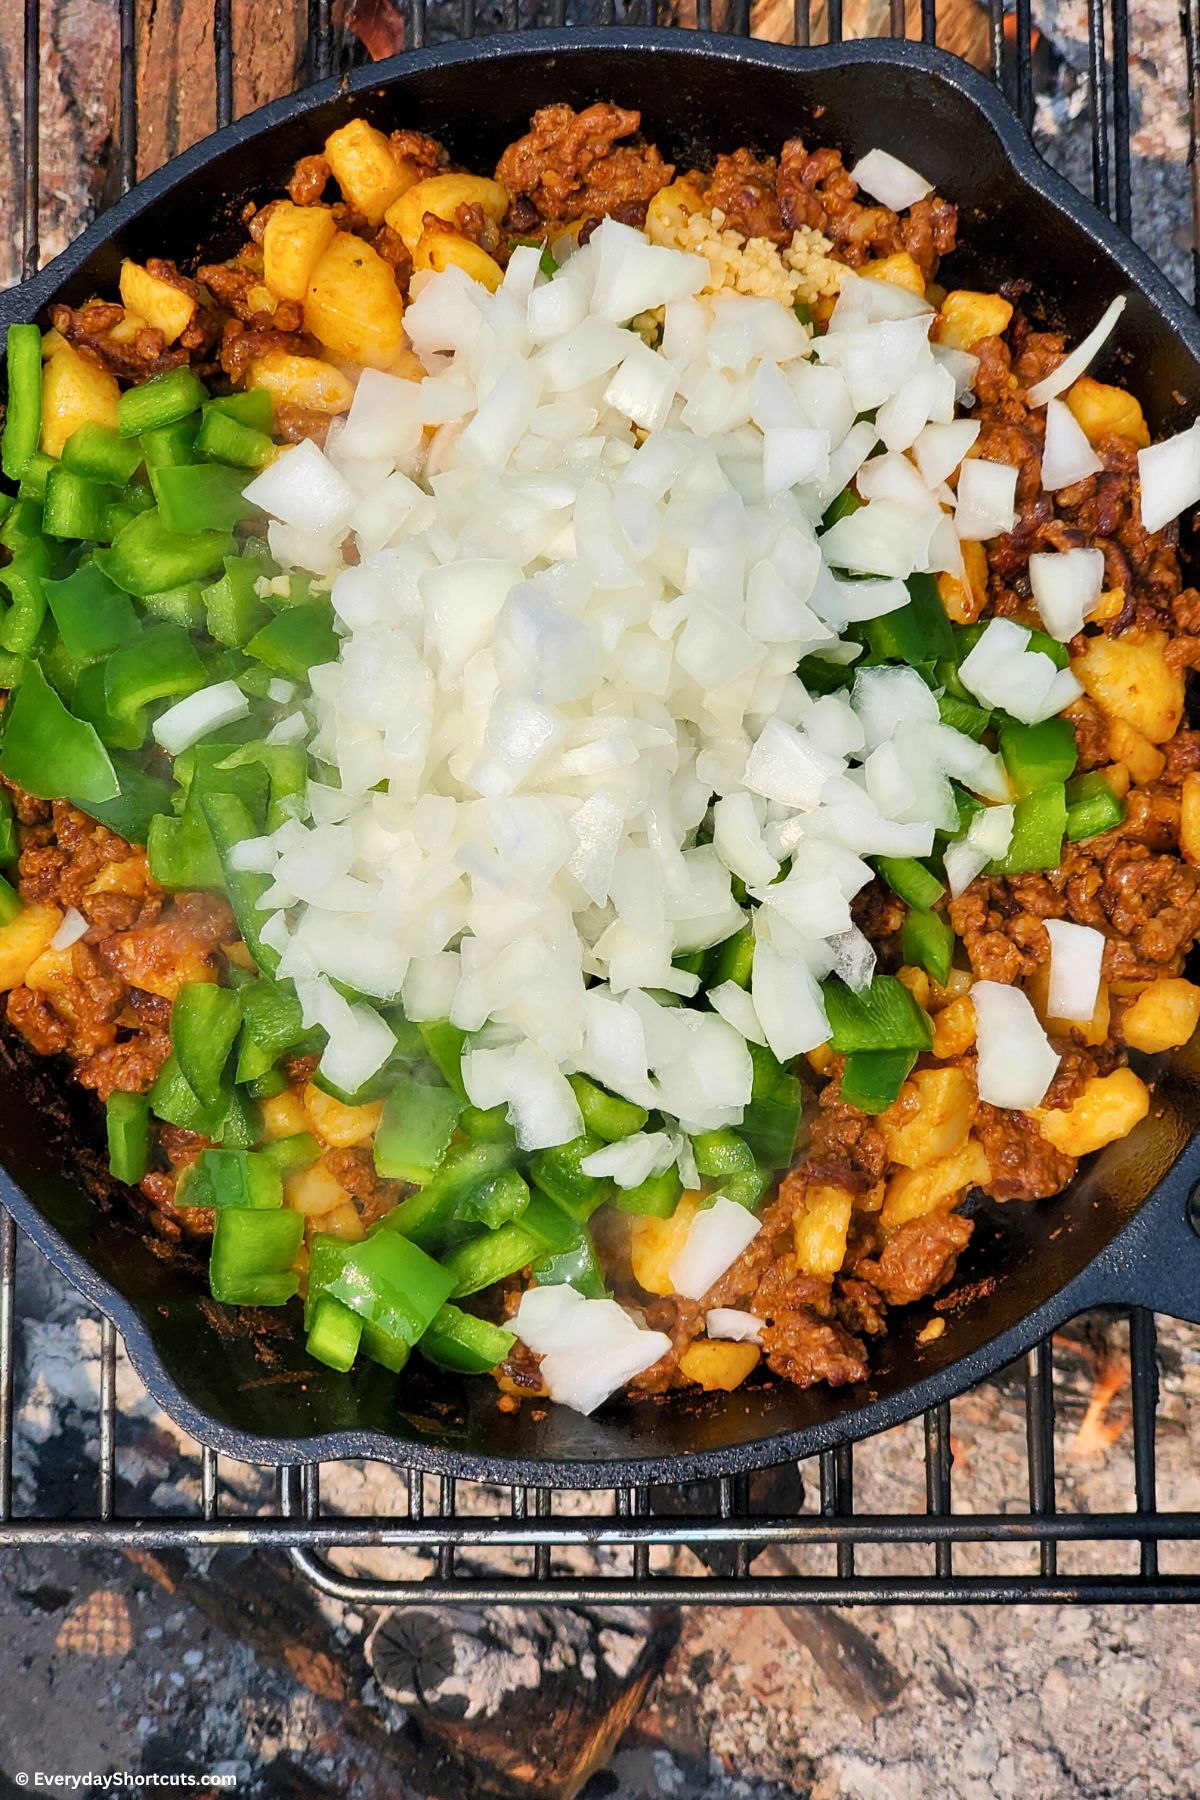 onions green peppers chorizo and potatoes in a skillet